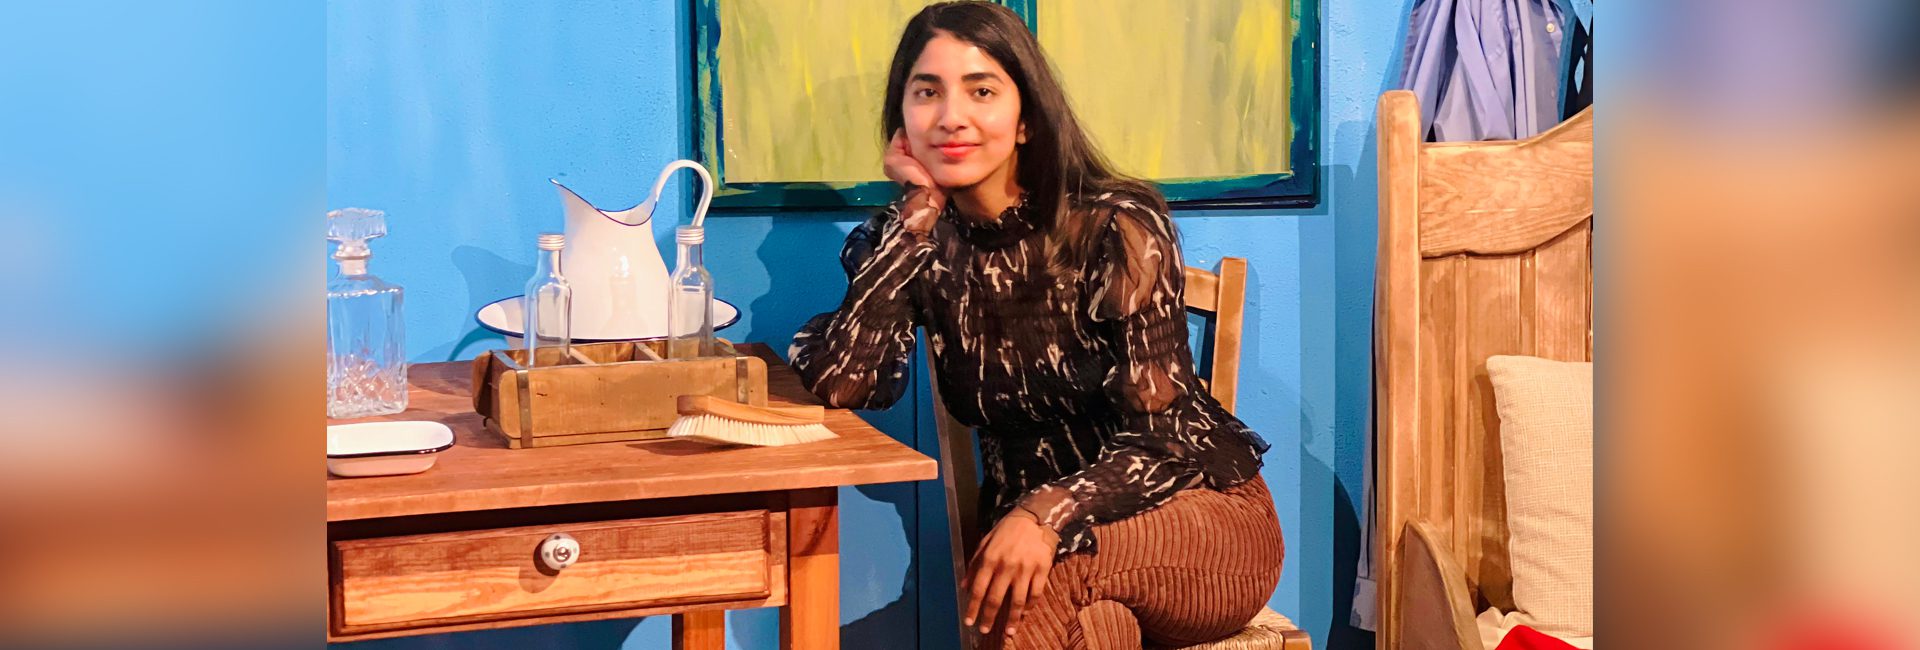 Meet Meghana Reddy: The 3D artist who is bringing stories to life with design, art, and creativity